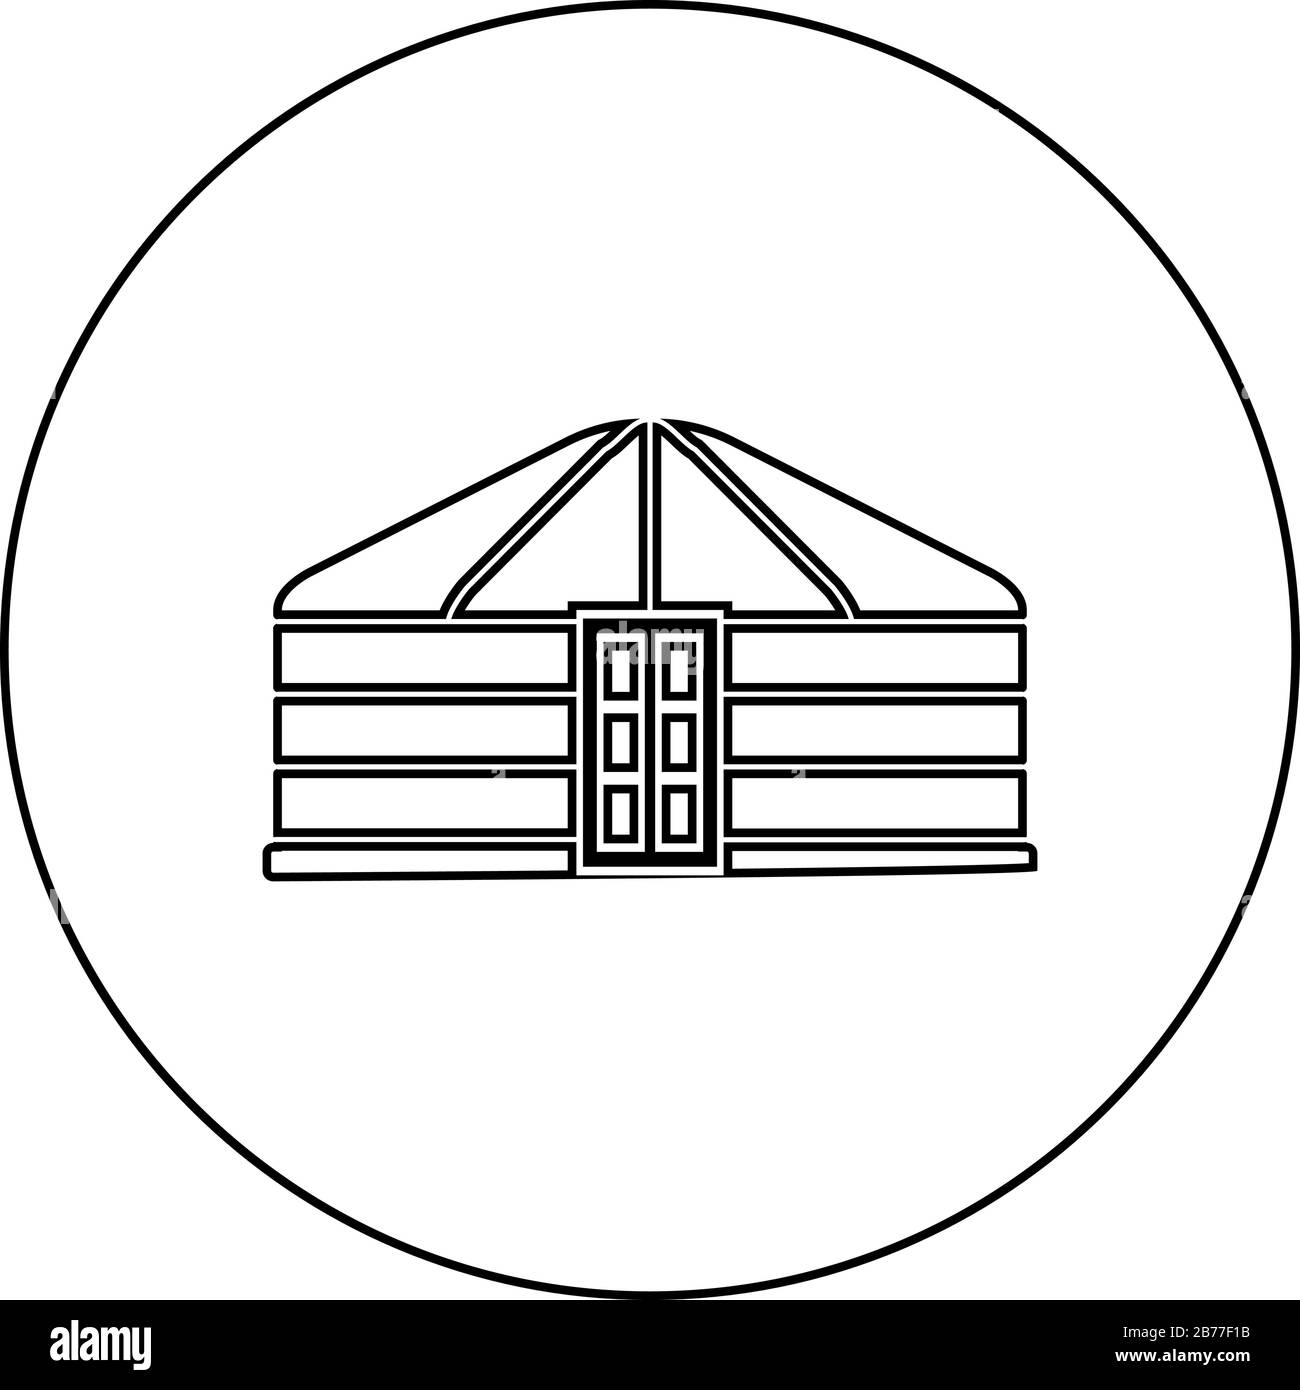 Yurt of nomads Portable frame dwelling with door Mongolian tent covering building icon in circle round outline black color vector illustration flat Stock Vector